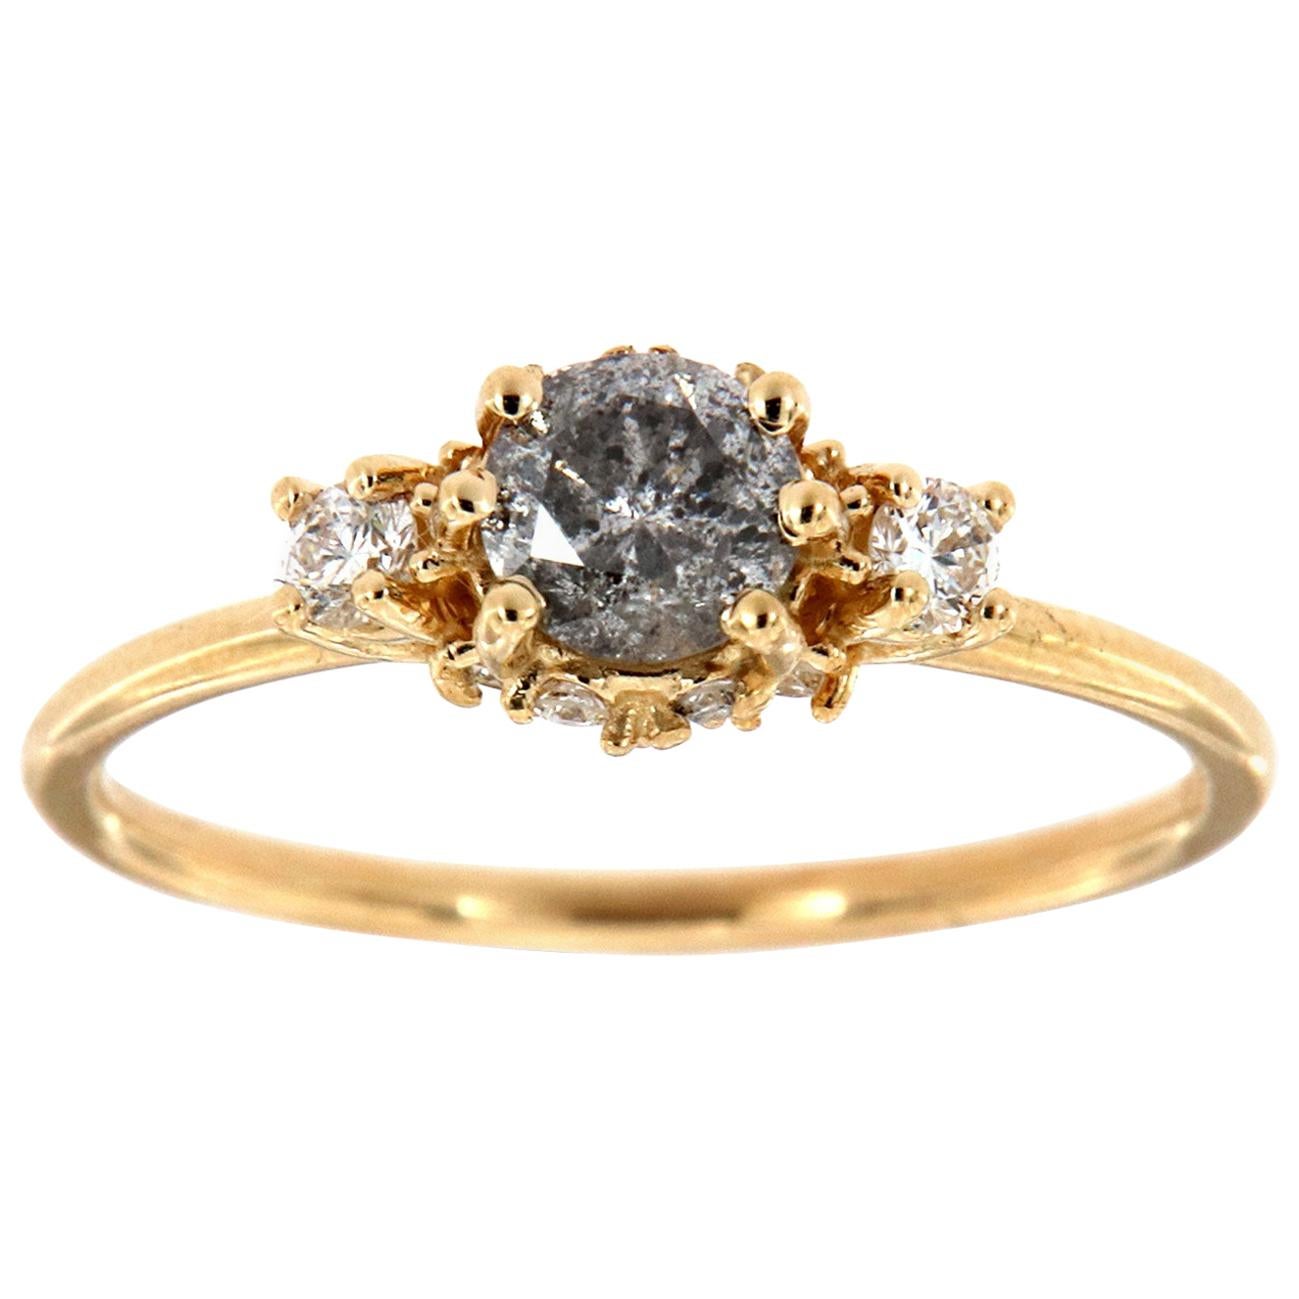 14K Yellow Gold Delicate Round Salt and Pepper Diamond Ring Center: 0.46 Carat